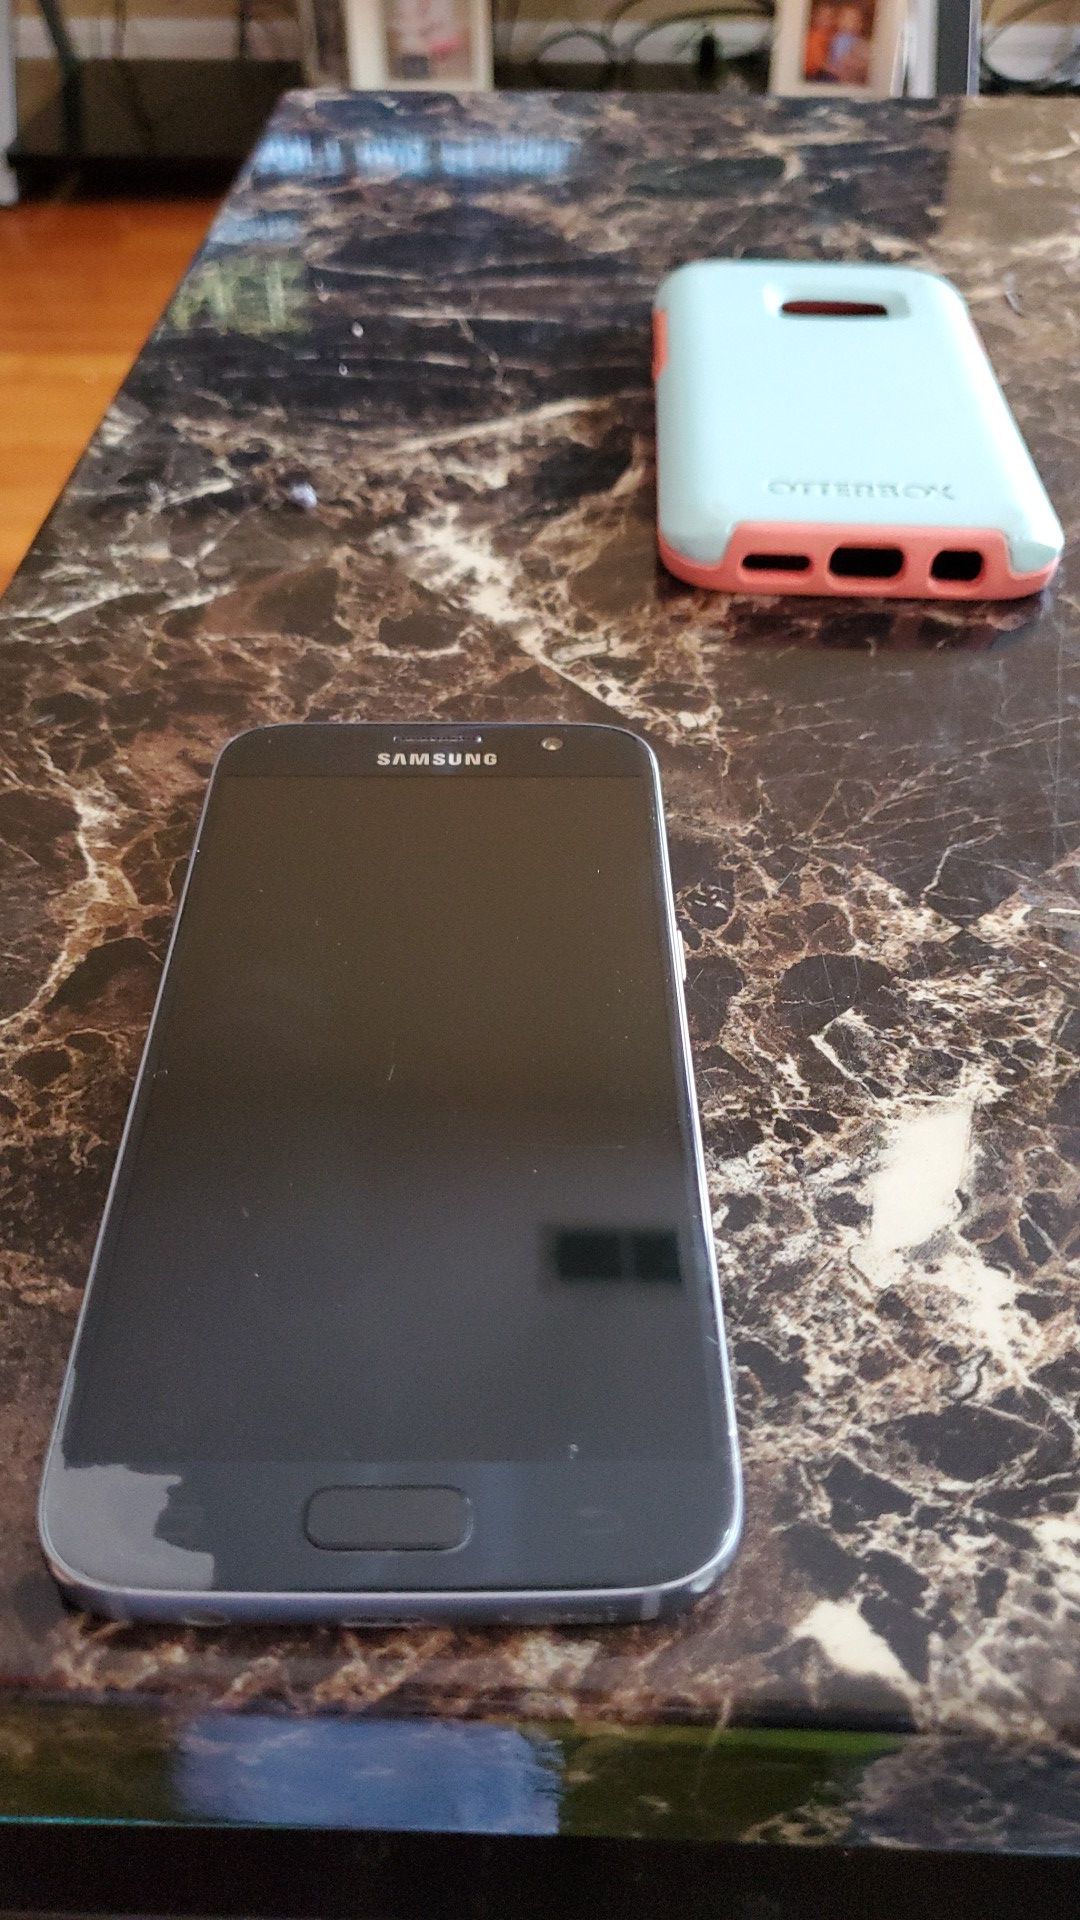 AT&T Samsung Galaxy S7 with Otterbox case